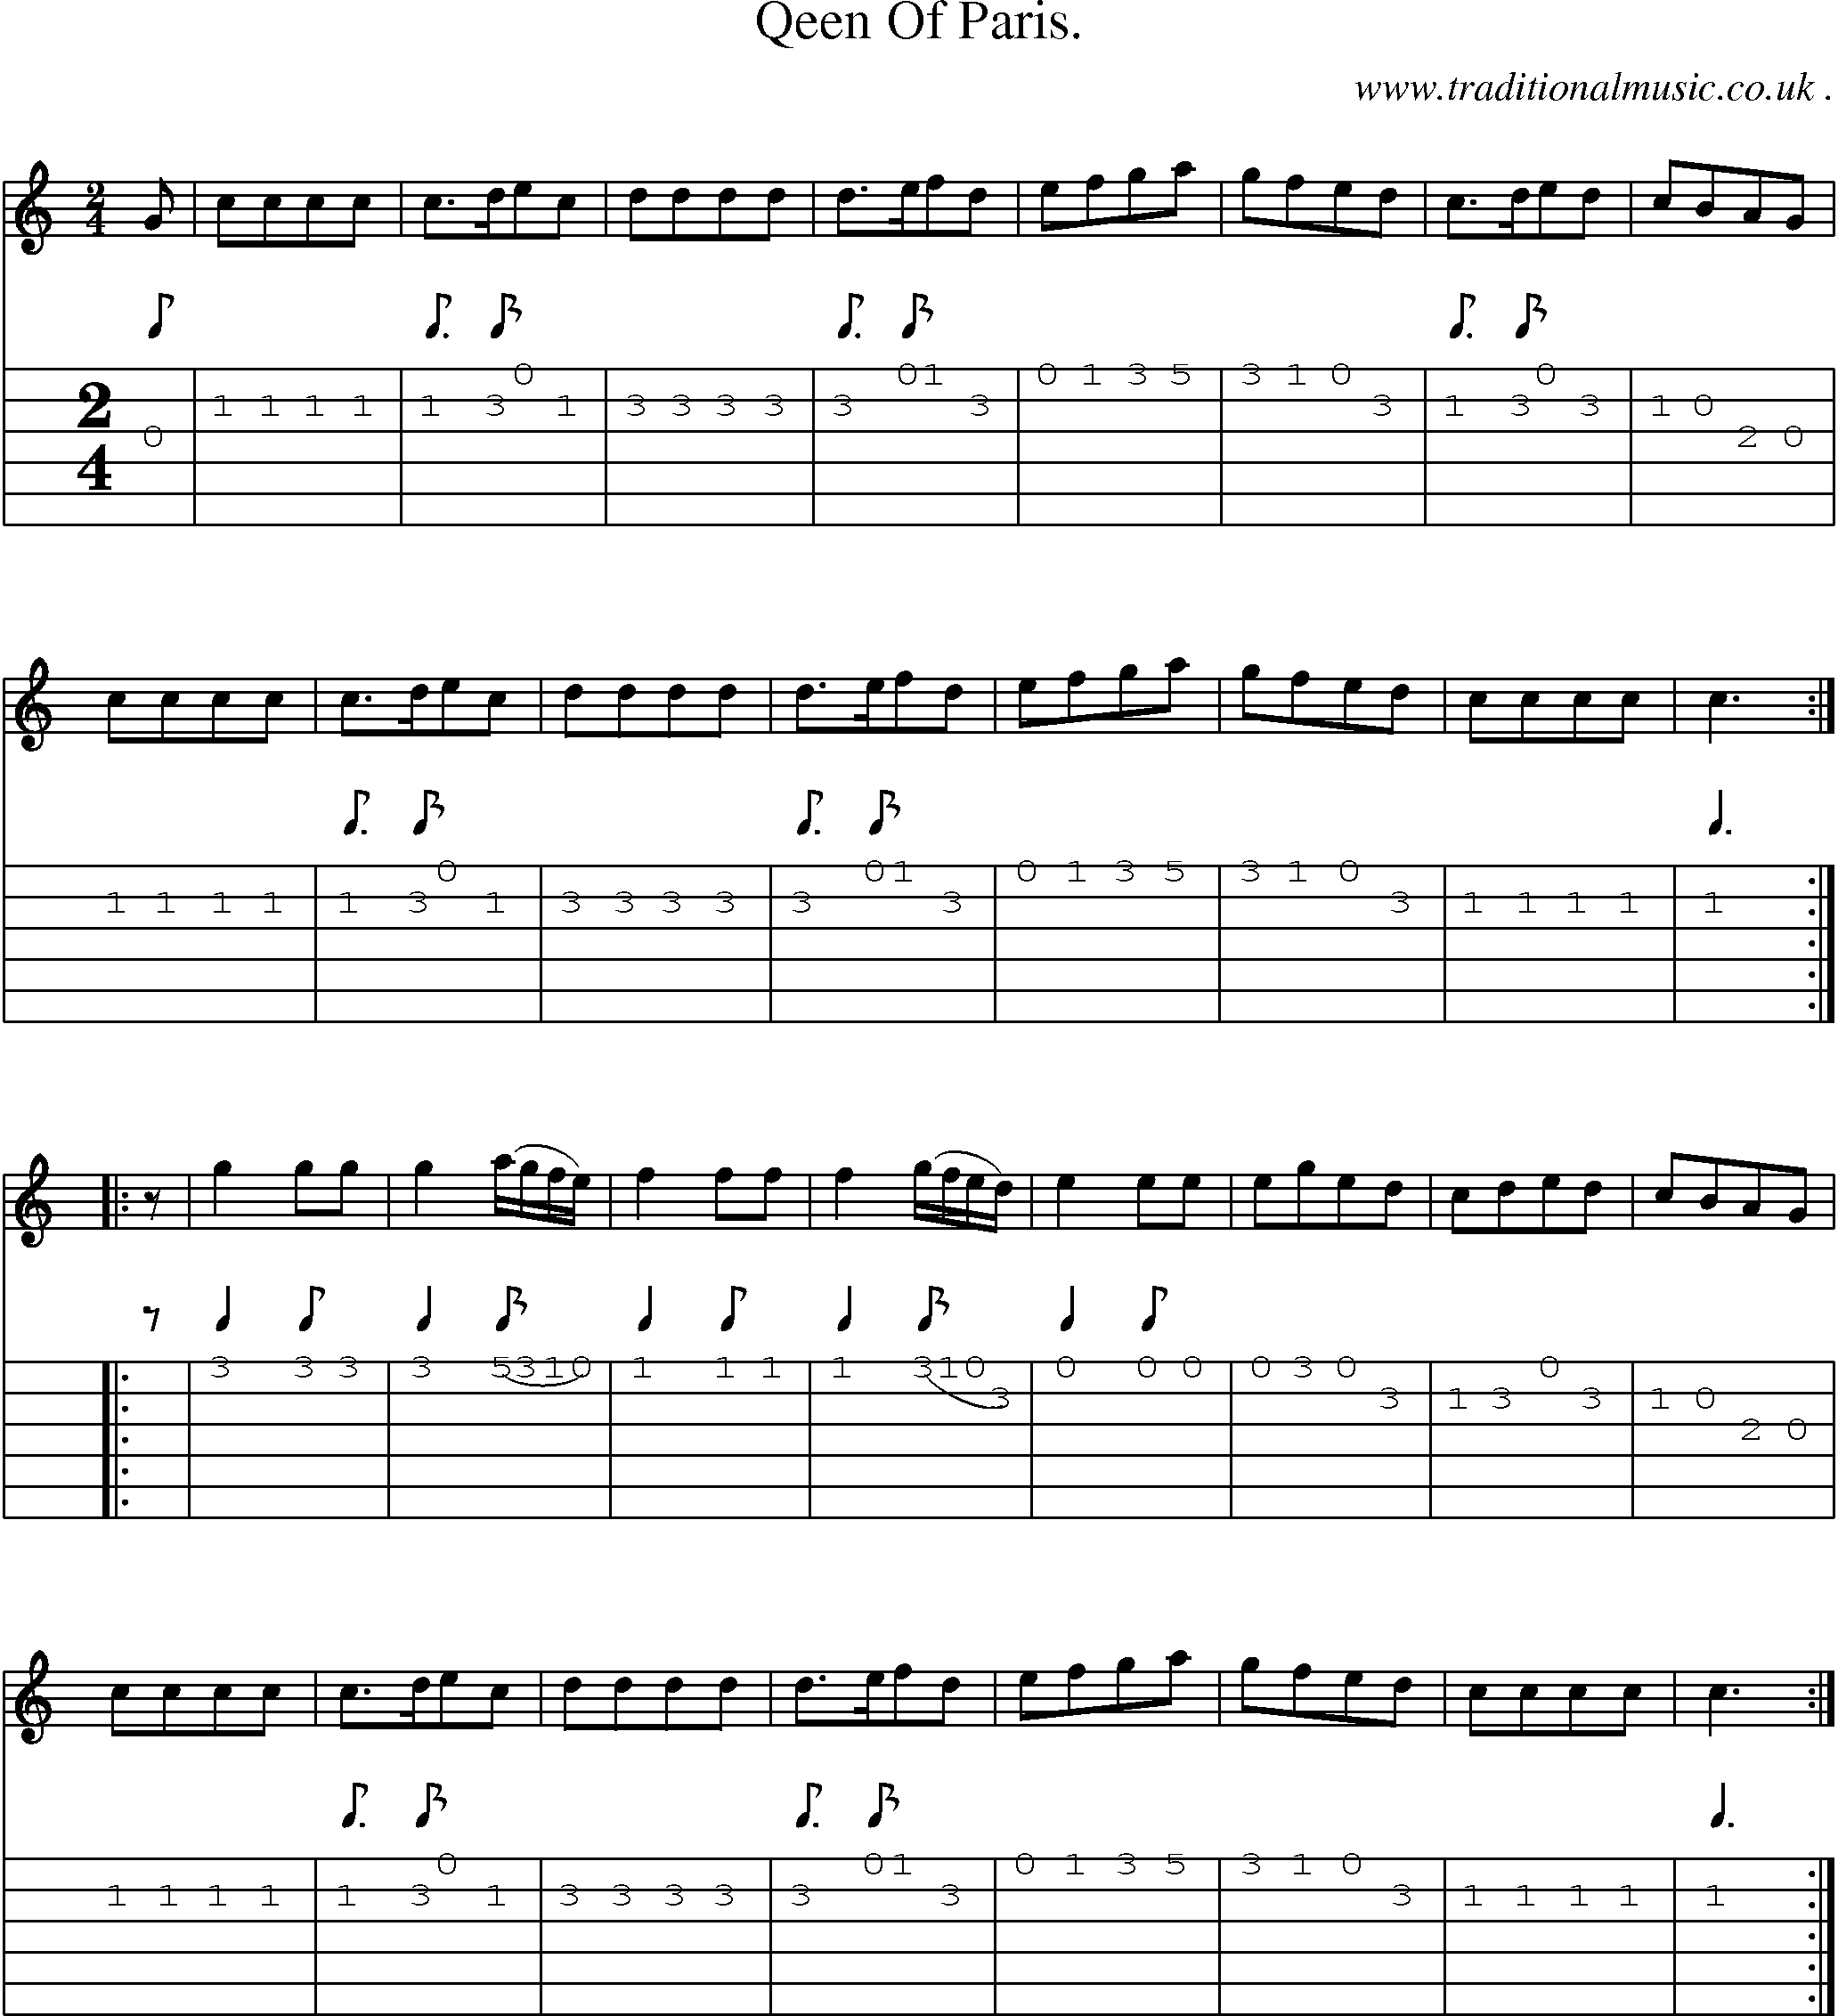 Sheet-Music and Guitar Tabs for Qeen Of Paris